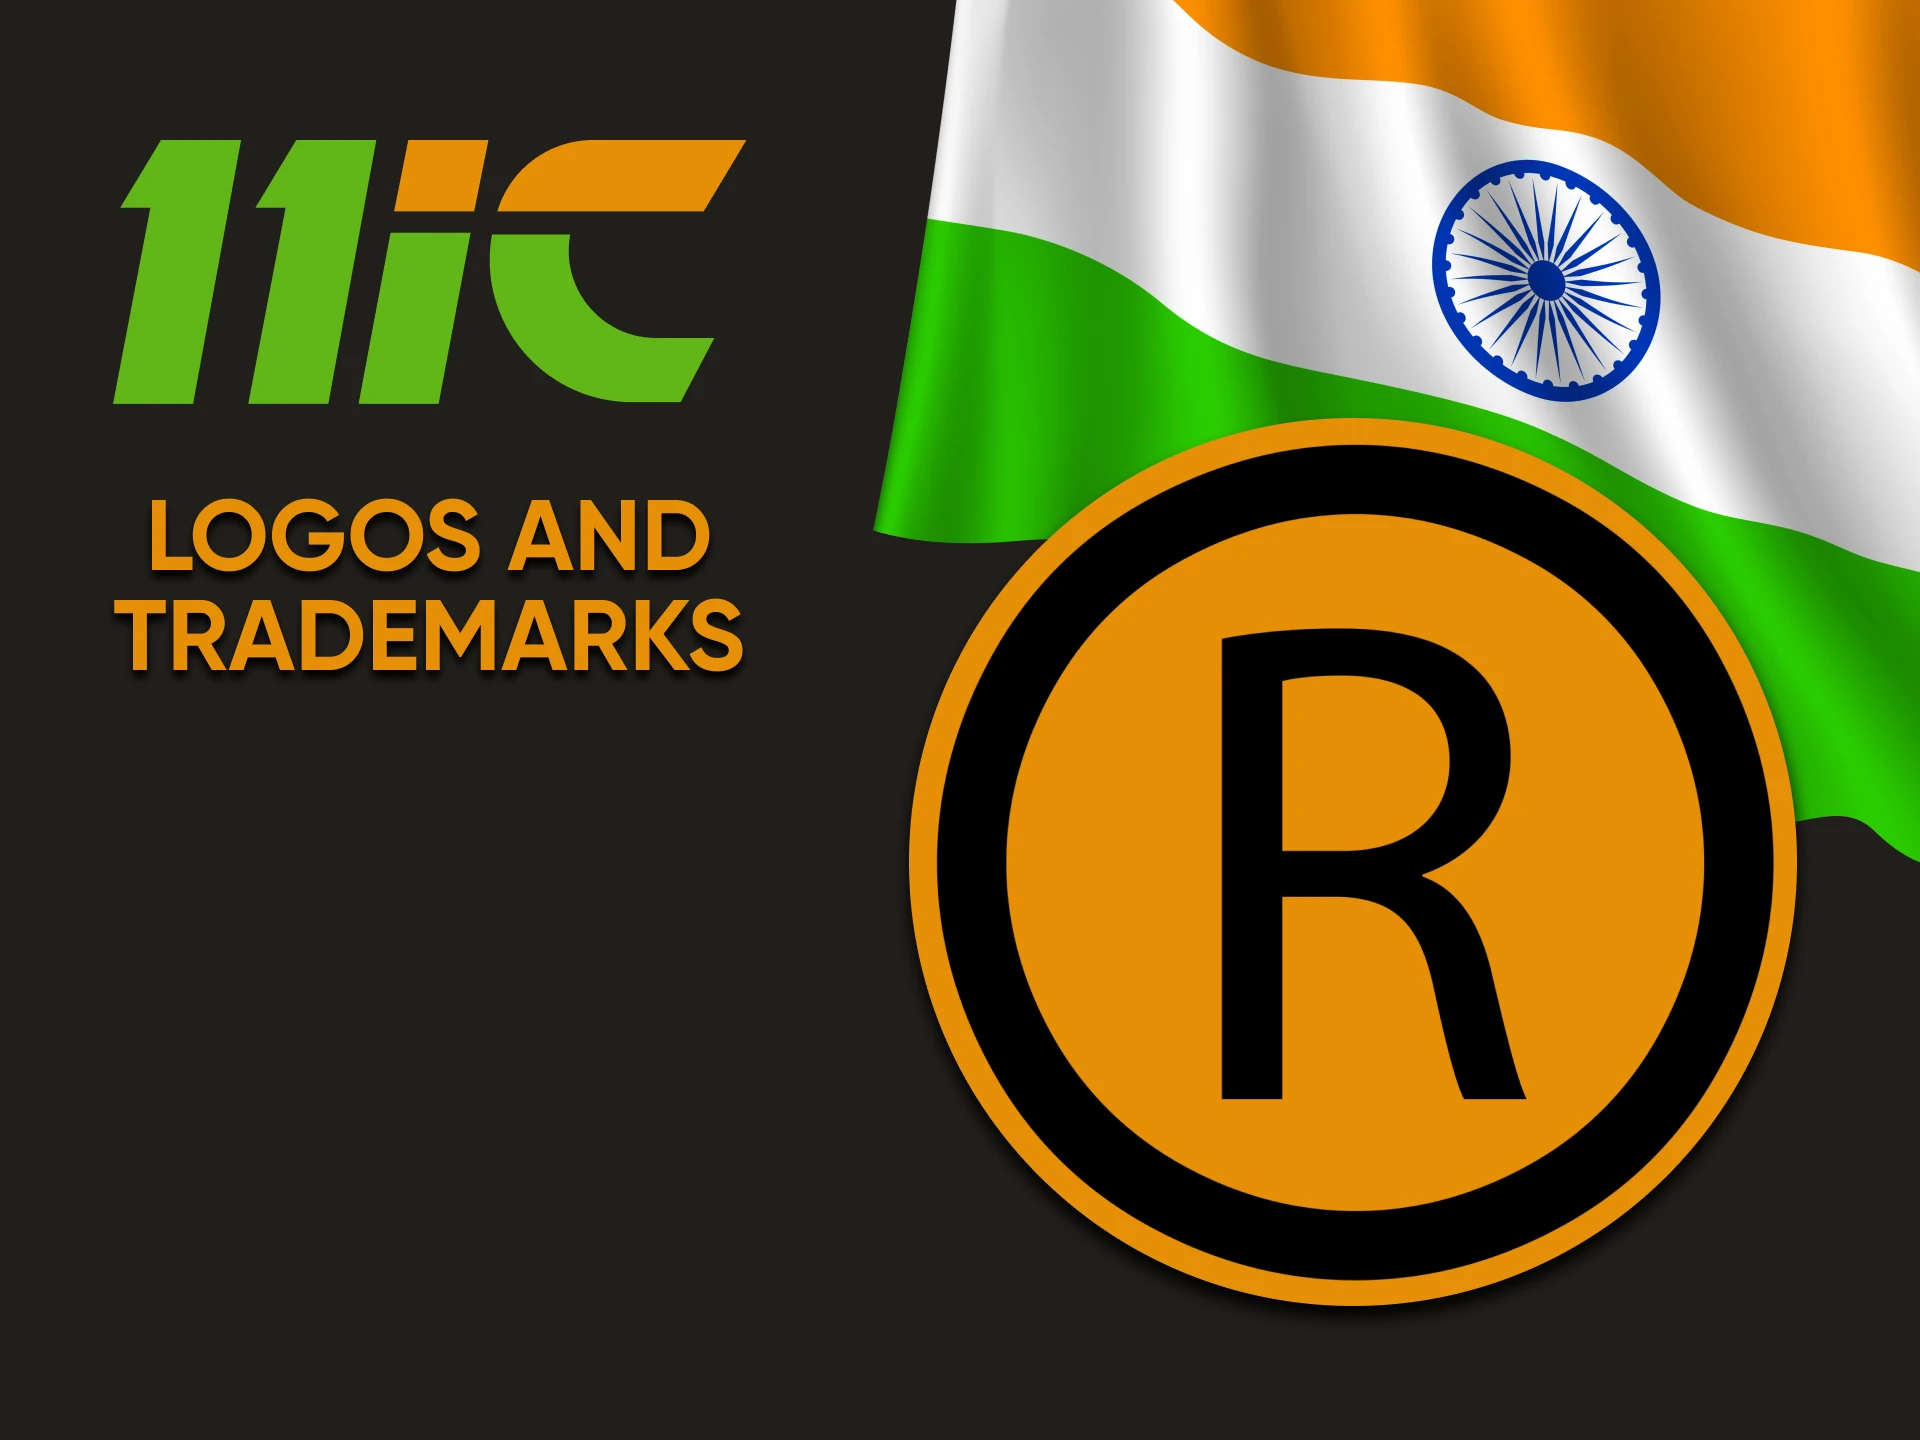 We will tell you who owns the logos on 11ic.